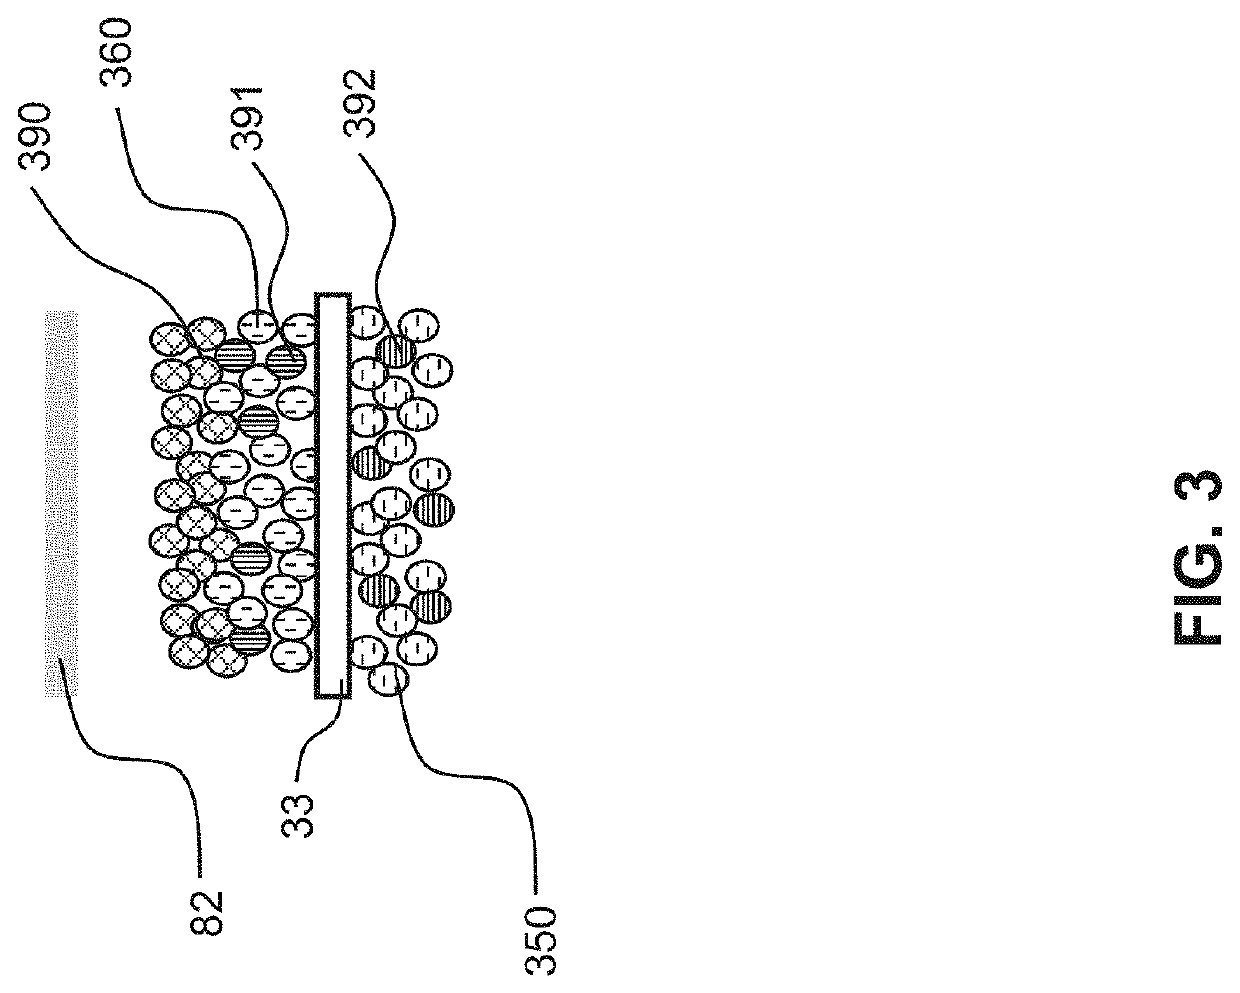 Bipolar solid-state battery with enhanced interfacial contact